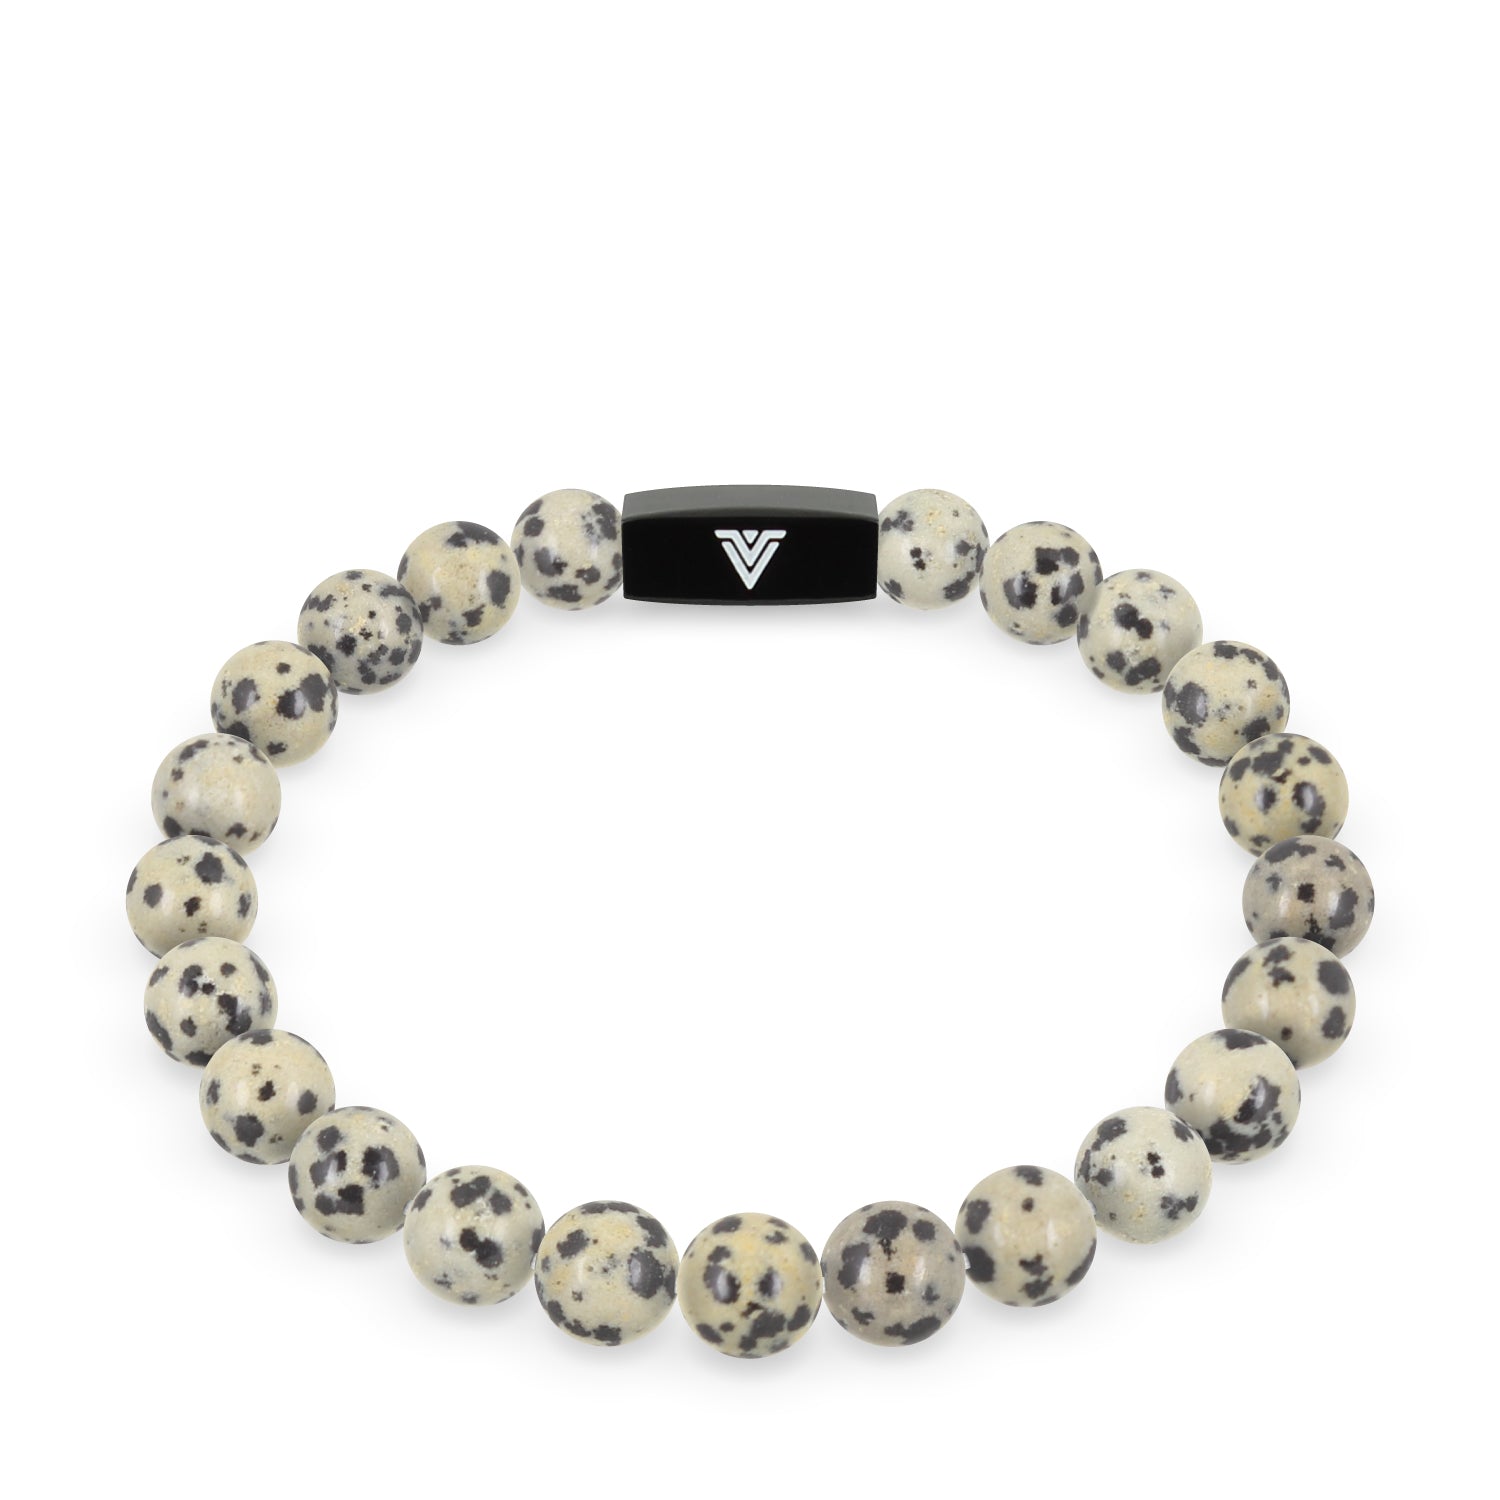 Front view of an 8mm Dalmatian Jasper crystal beaded stretch bracelet with black stainless steel logo bead made by Voltlin